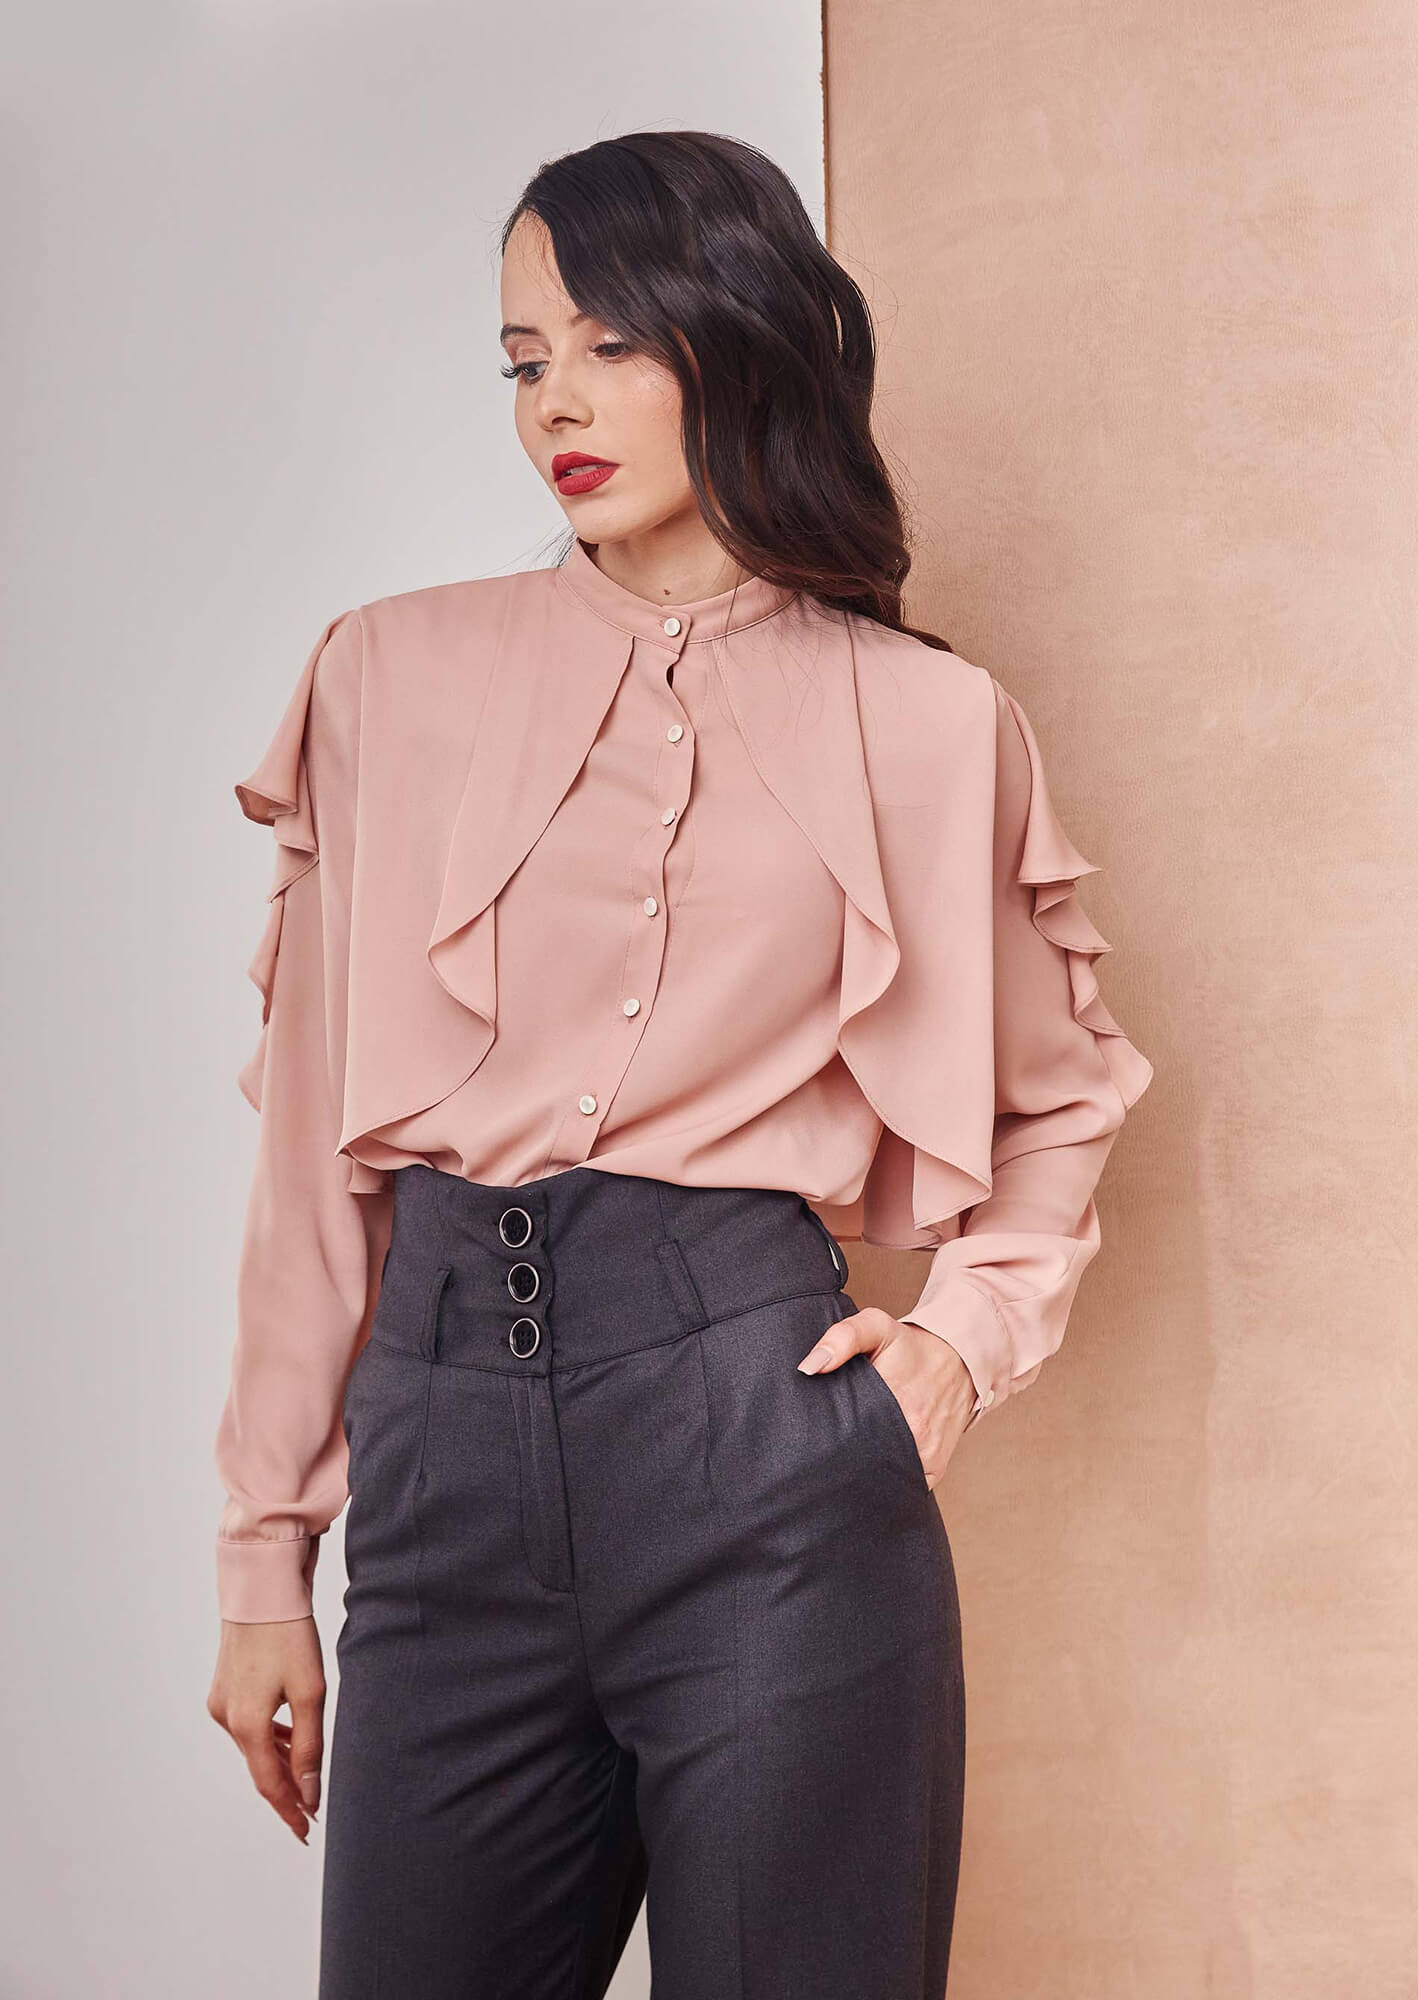 Drapped Ruffle Pastel Shirt with High Waisted Gray Pants